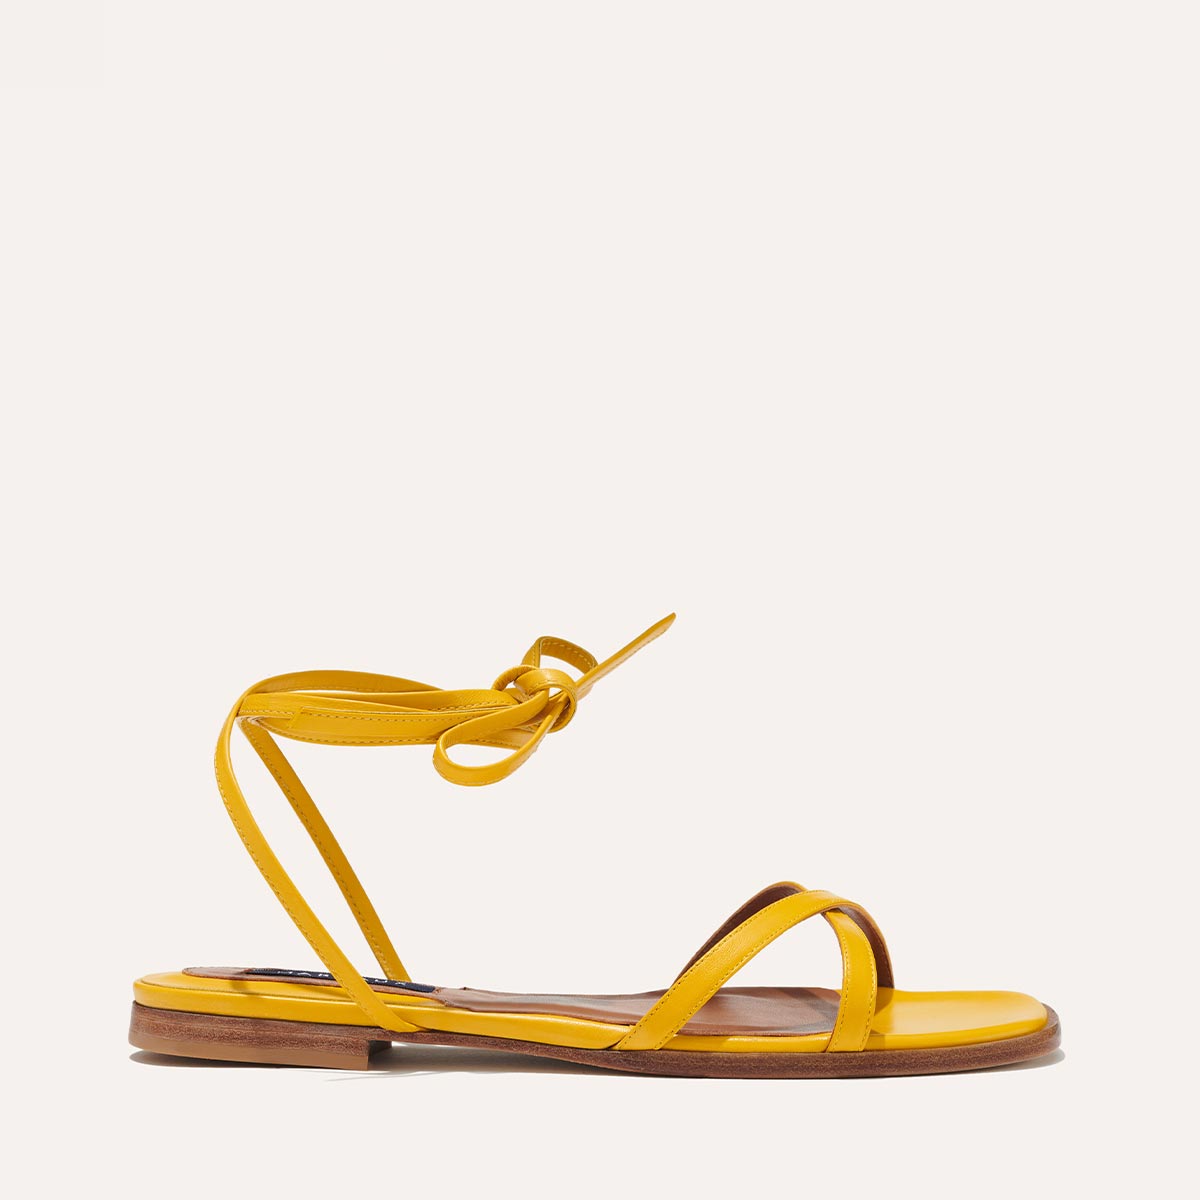 Margaux's classic strappy Wrap Sandal with ankle ties, made in Spain from soft, sunflower yellow Italian suede